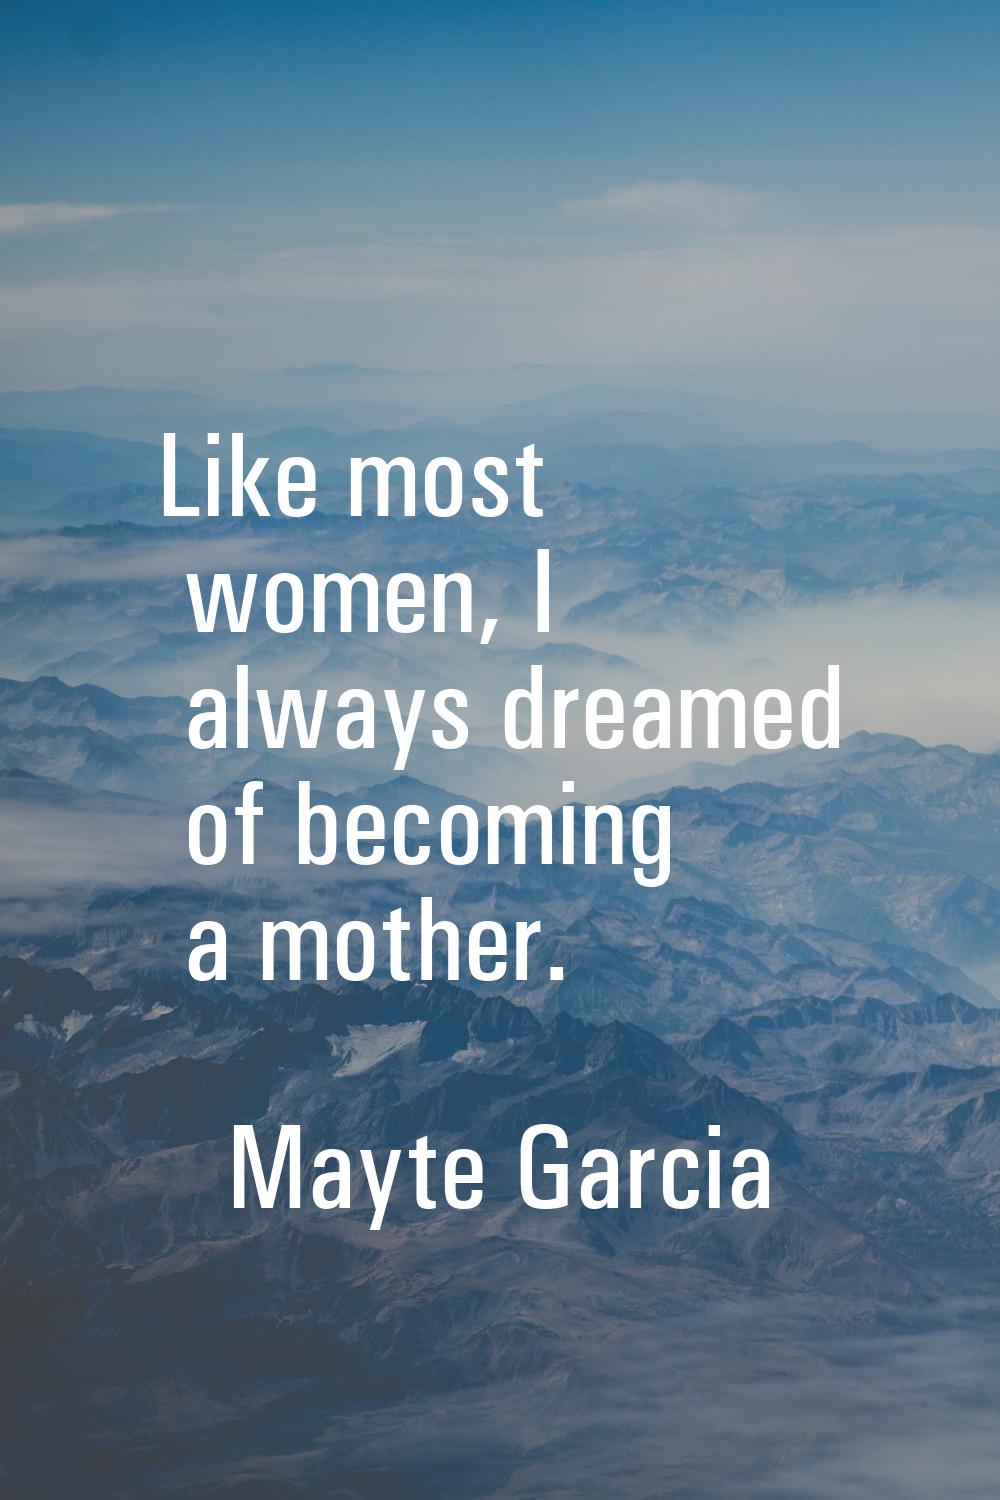 Like most women, I always dreamed of becoming a mother.